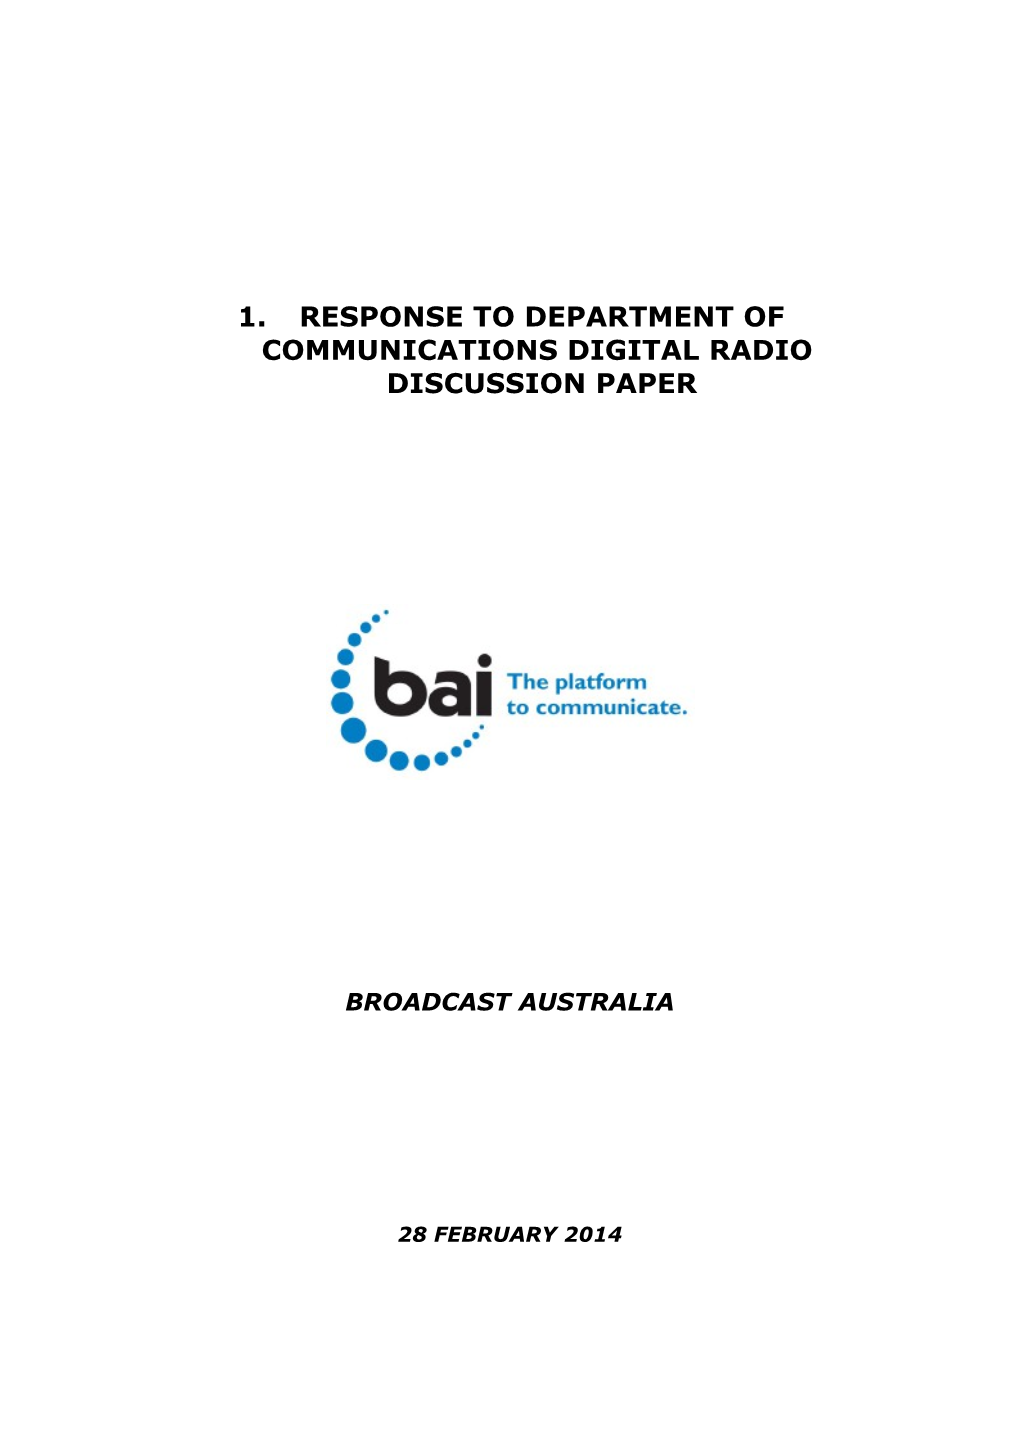 Response to Department of Communications Digital Radio Discussion Paper